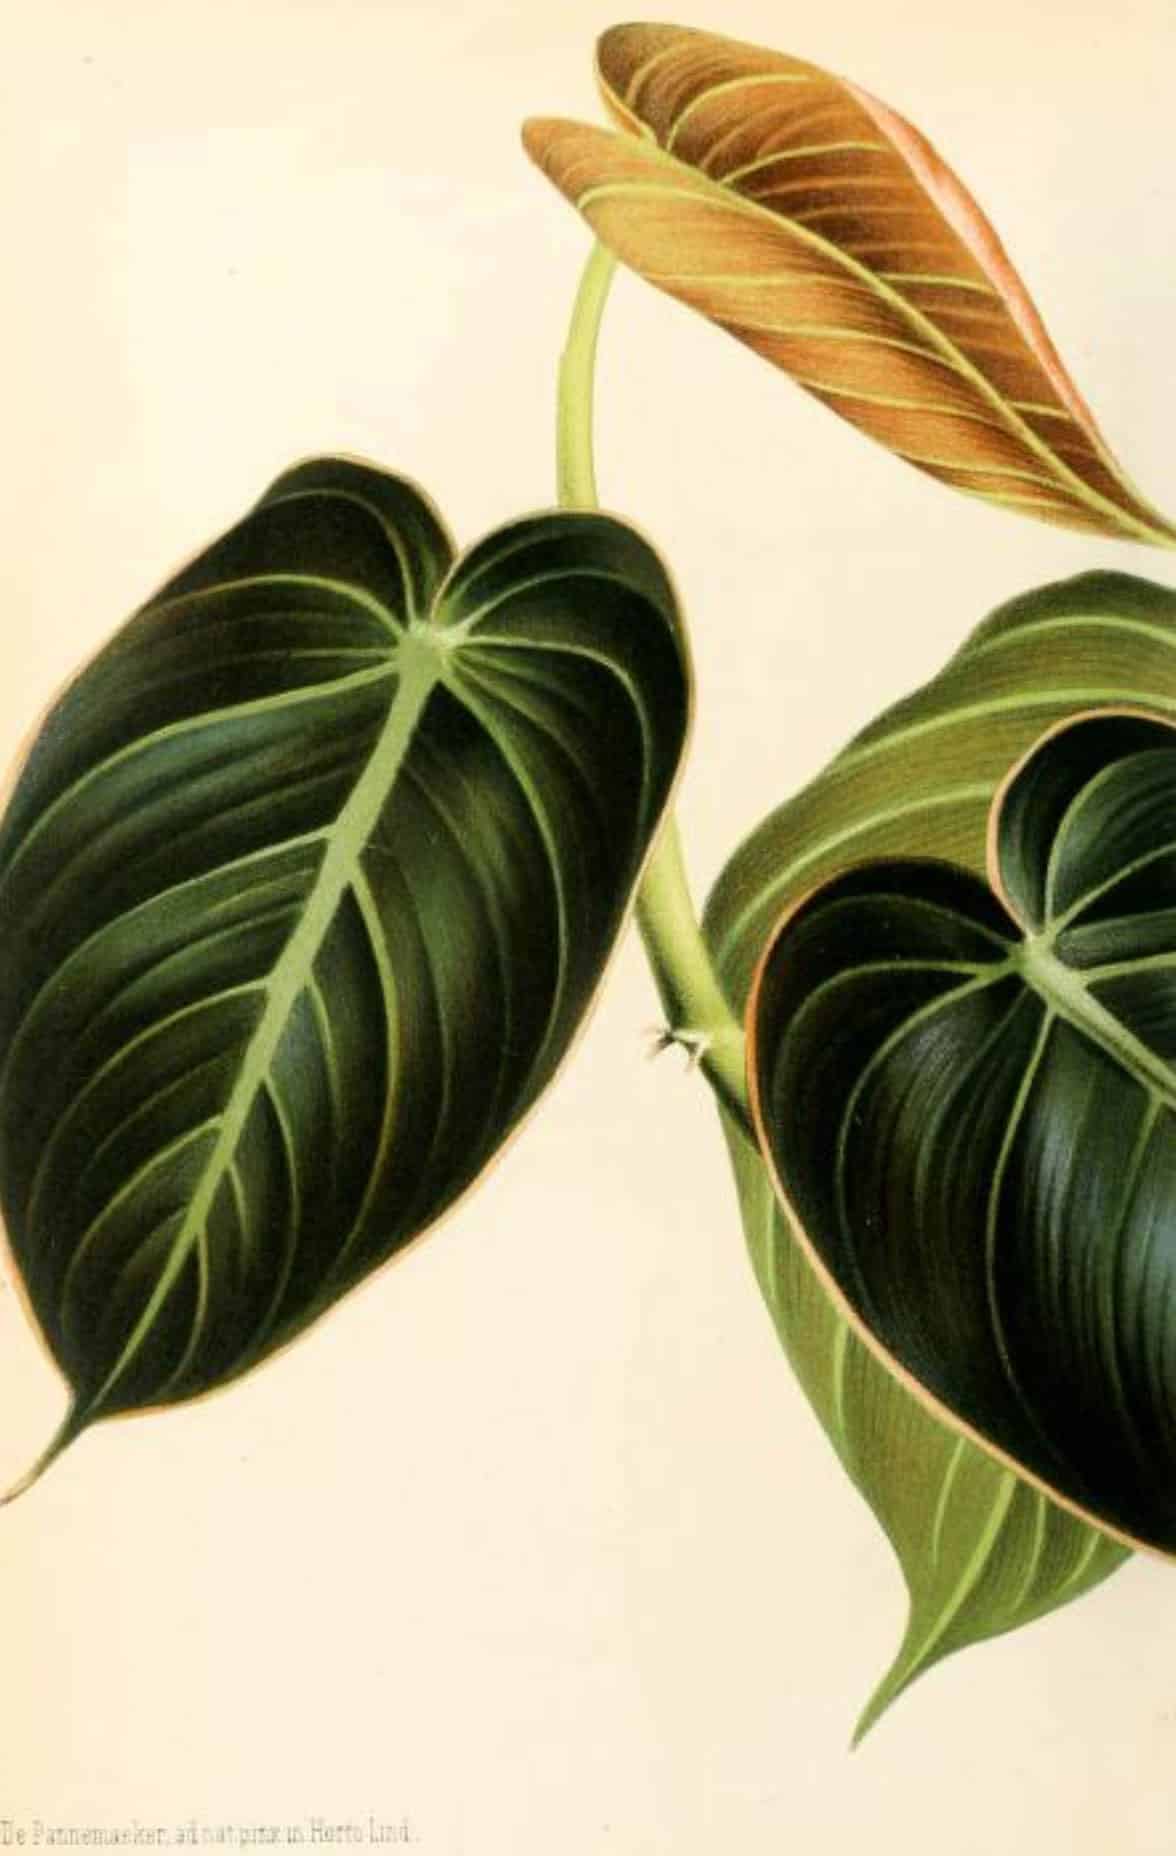 Botanical illustration of Philodendron melanochrysum leaves with a new leaf unfurling, as seen in an 1873 French textbook